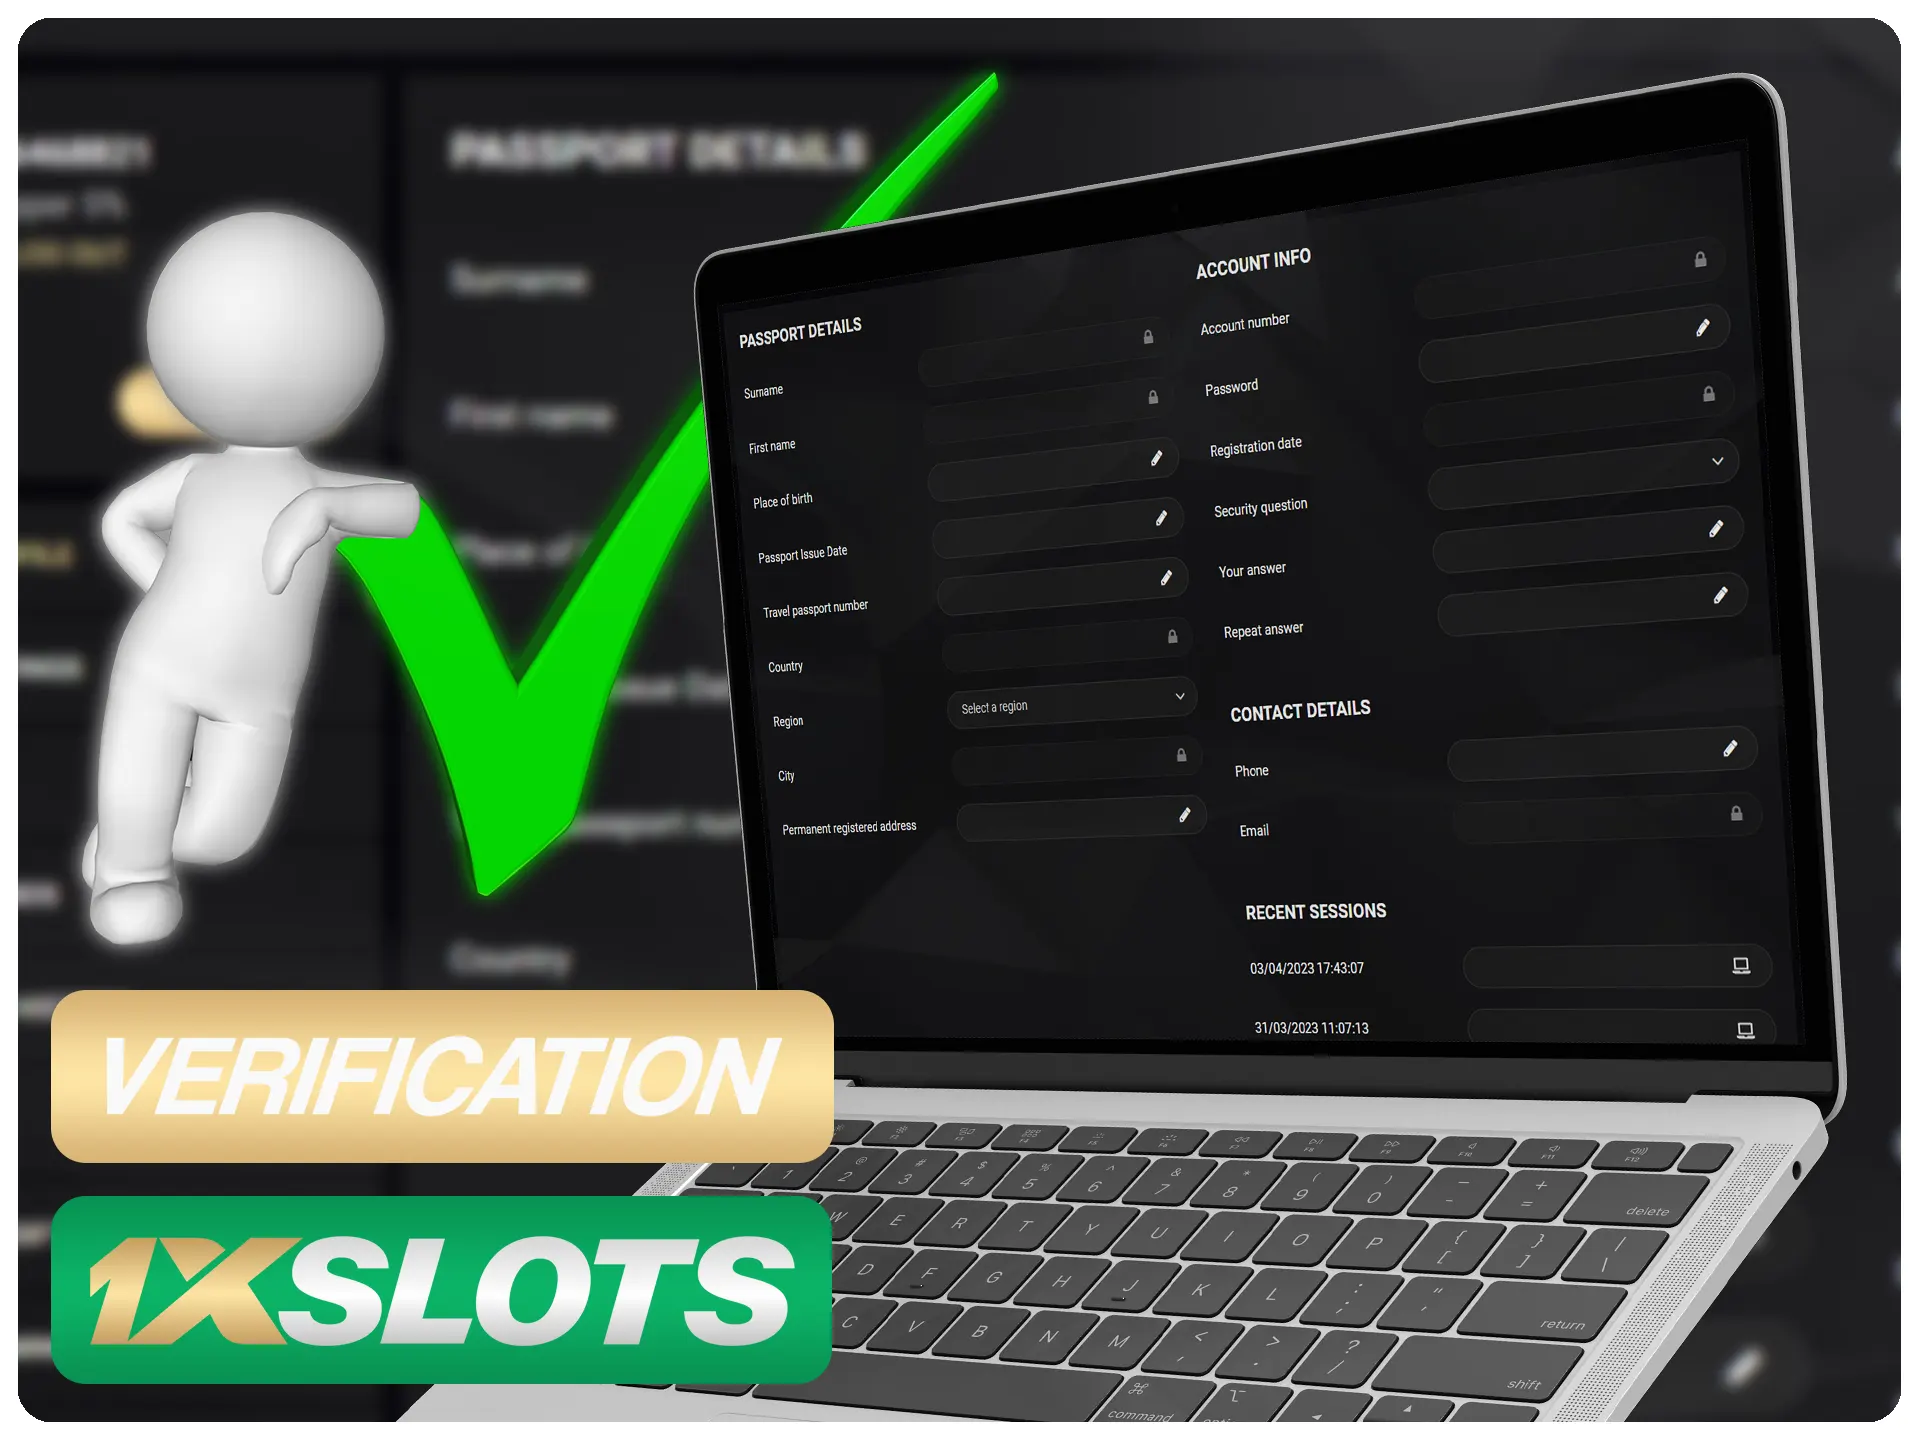 Verify your 1xSlots account by providing required information.